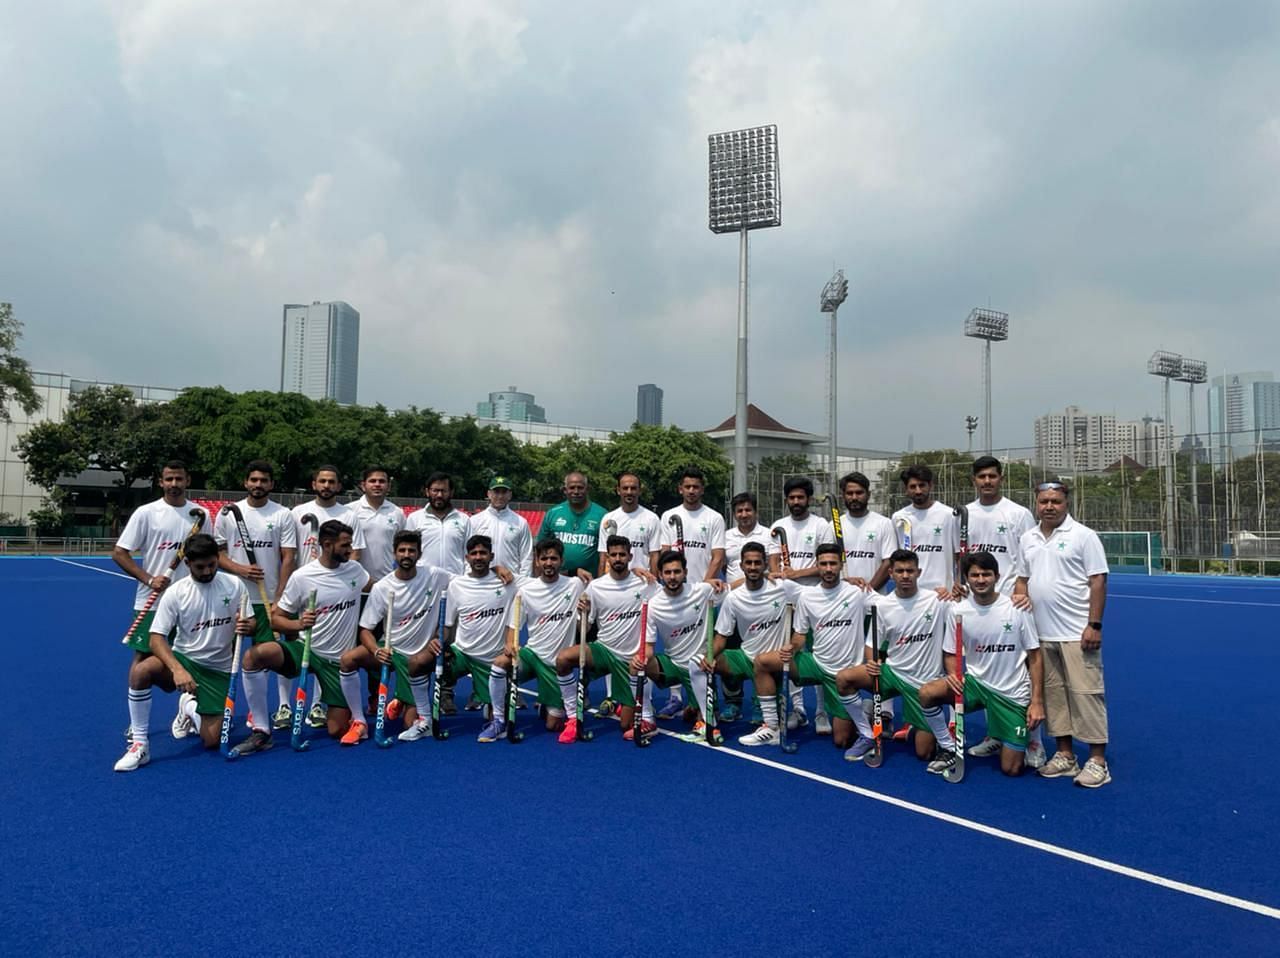 The Pakistan hockey team at a training session ahead of the Asia Cup. (PC: HI)